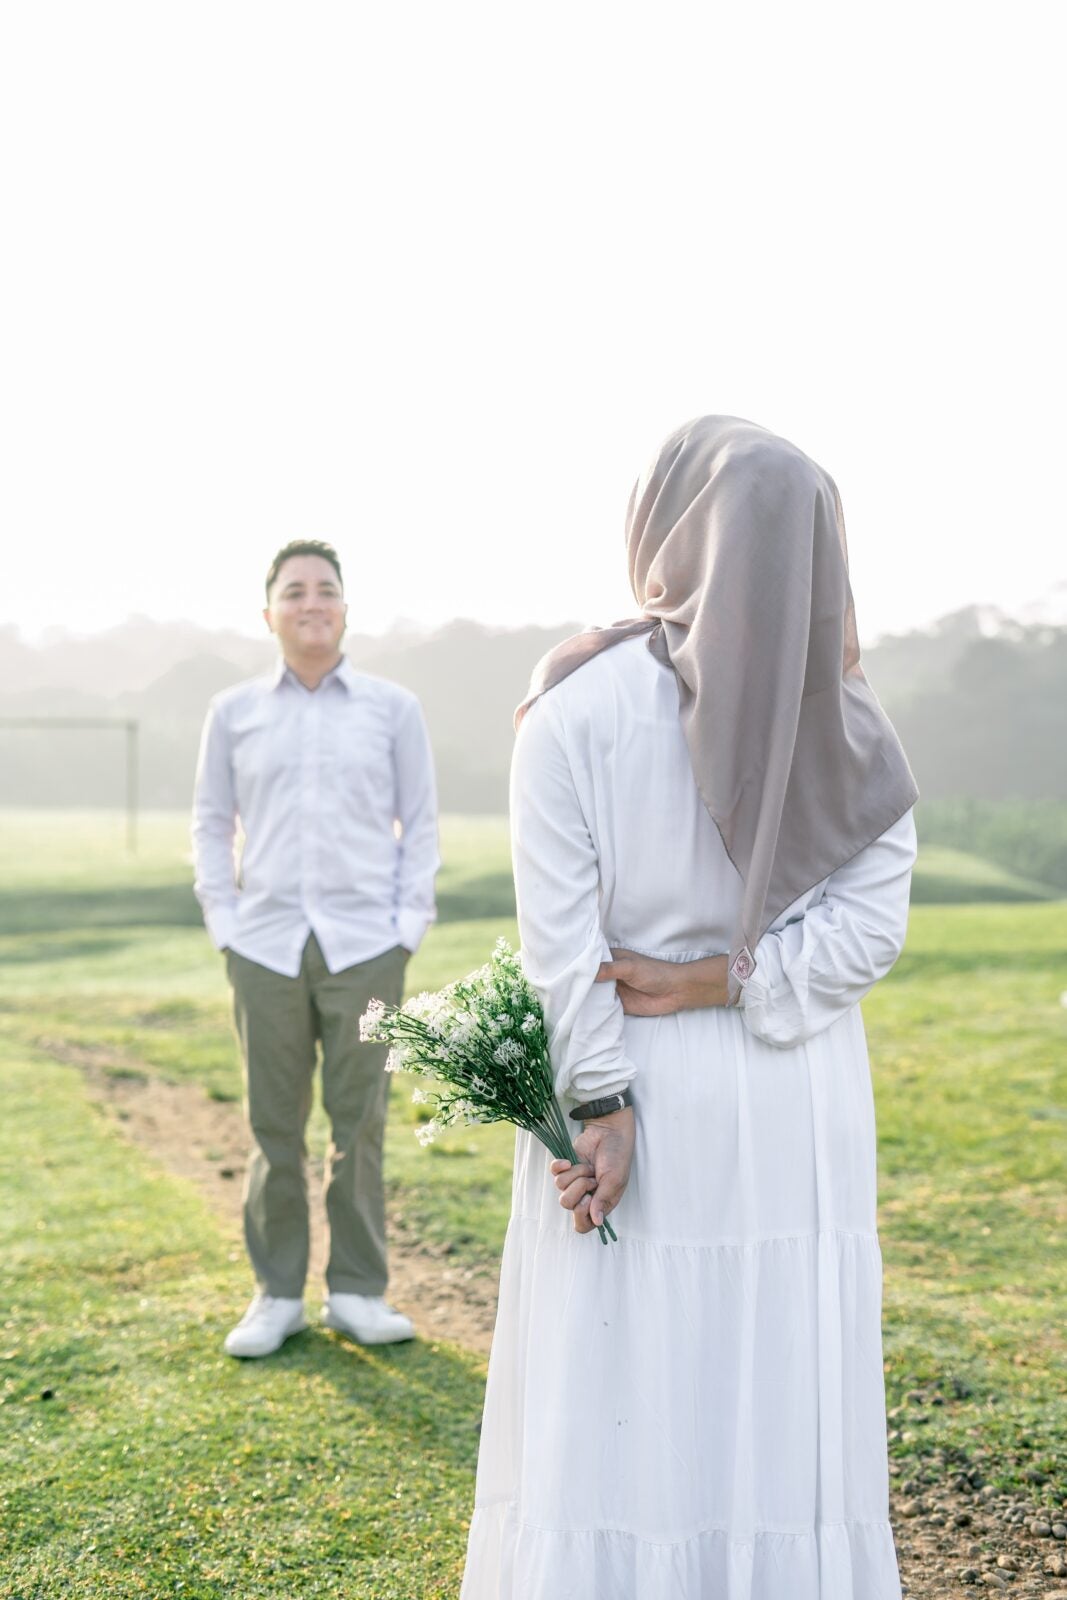 A Malay woman standing in front of a Malay Man, her hands are hidden behind her back and she is holding a bouquet of flowers.